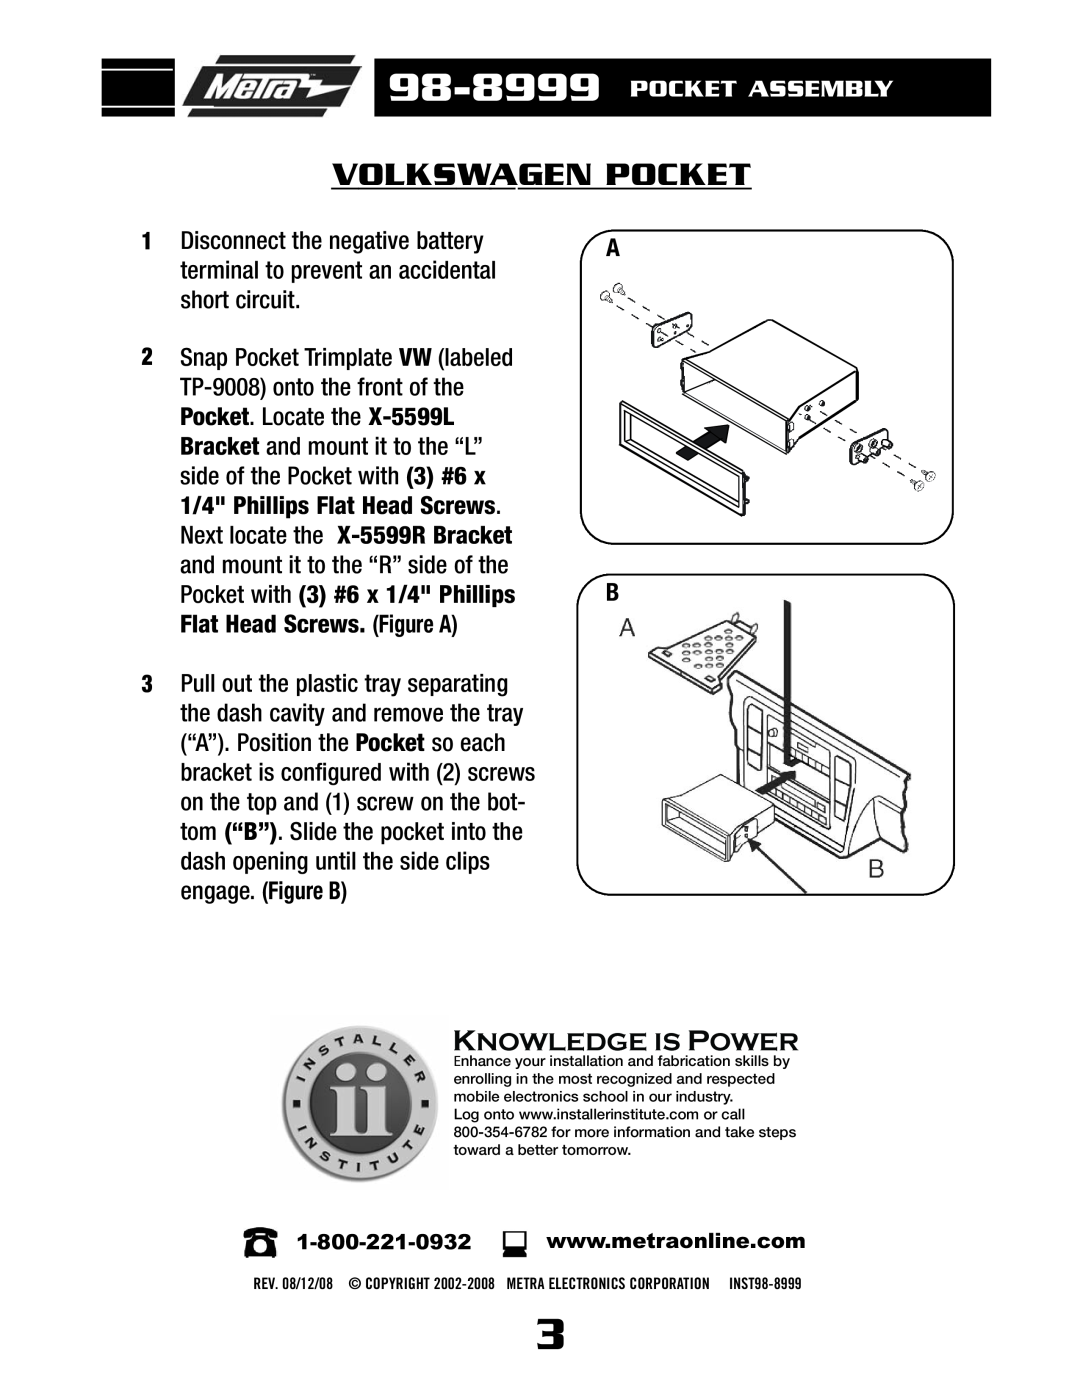 Metra Electronics 98-8999 installation instructions Volkswagen Pocket, Pocket Assembly, Knowledge Is Power 